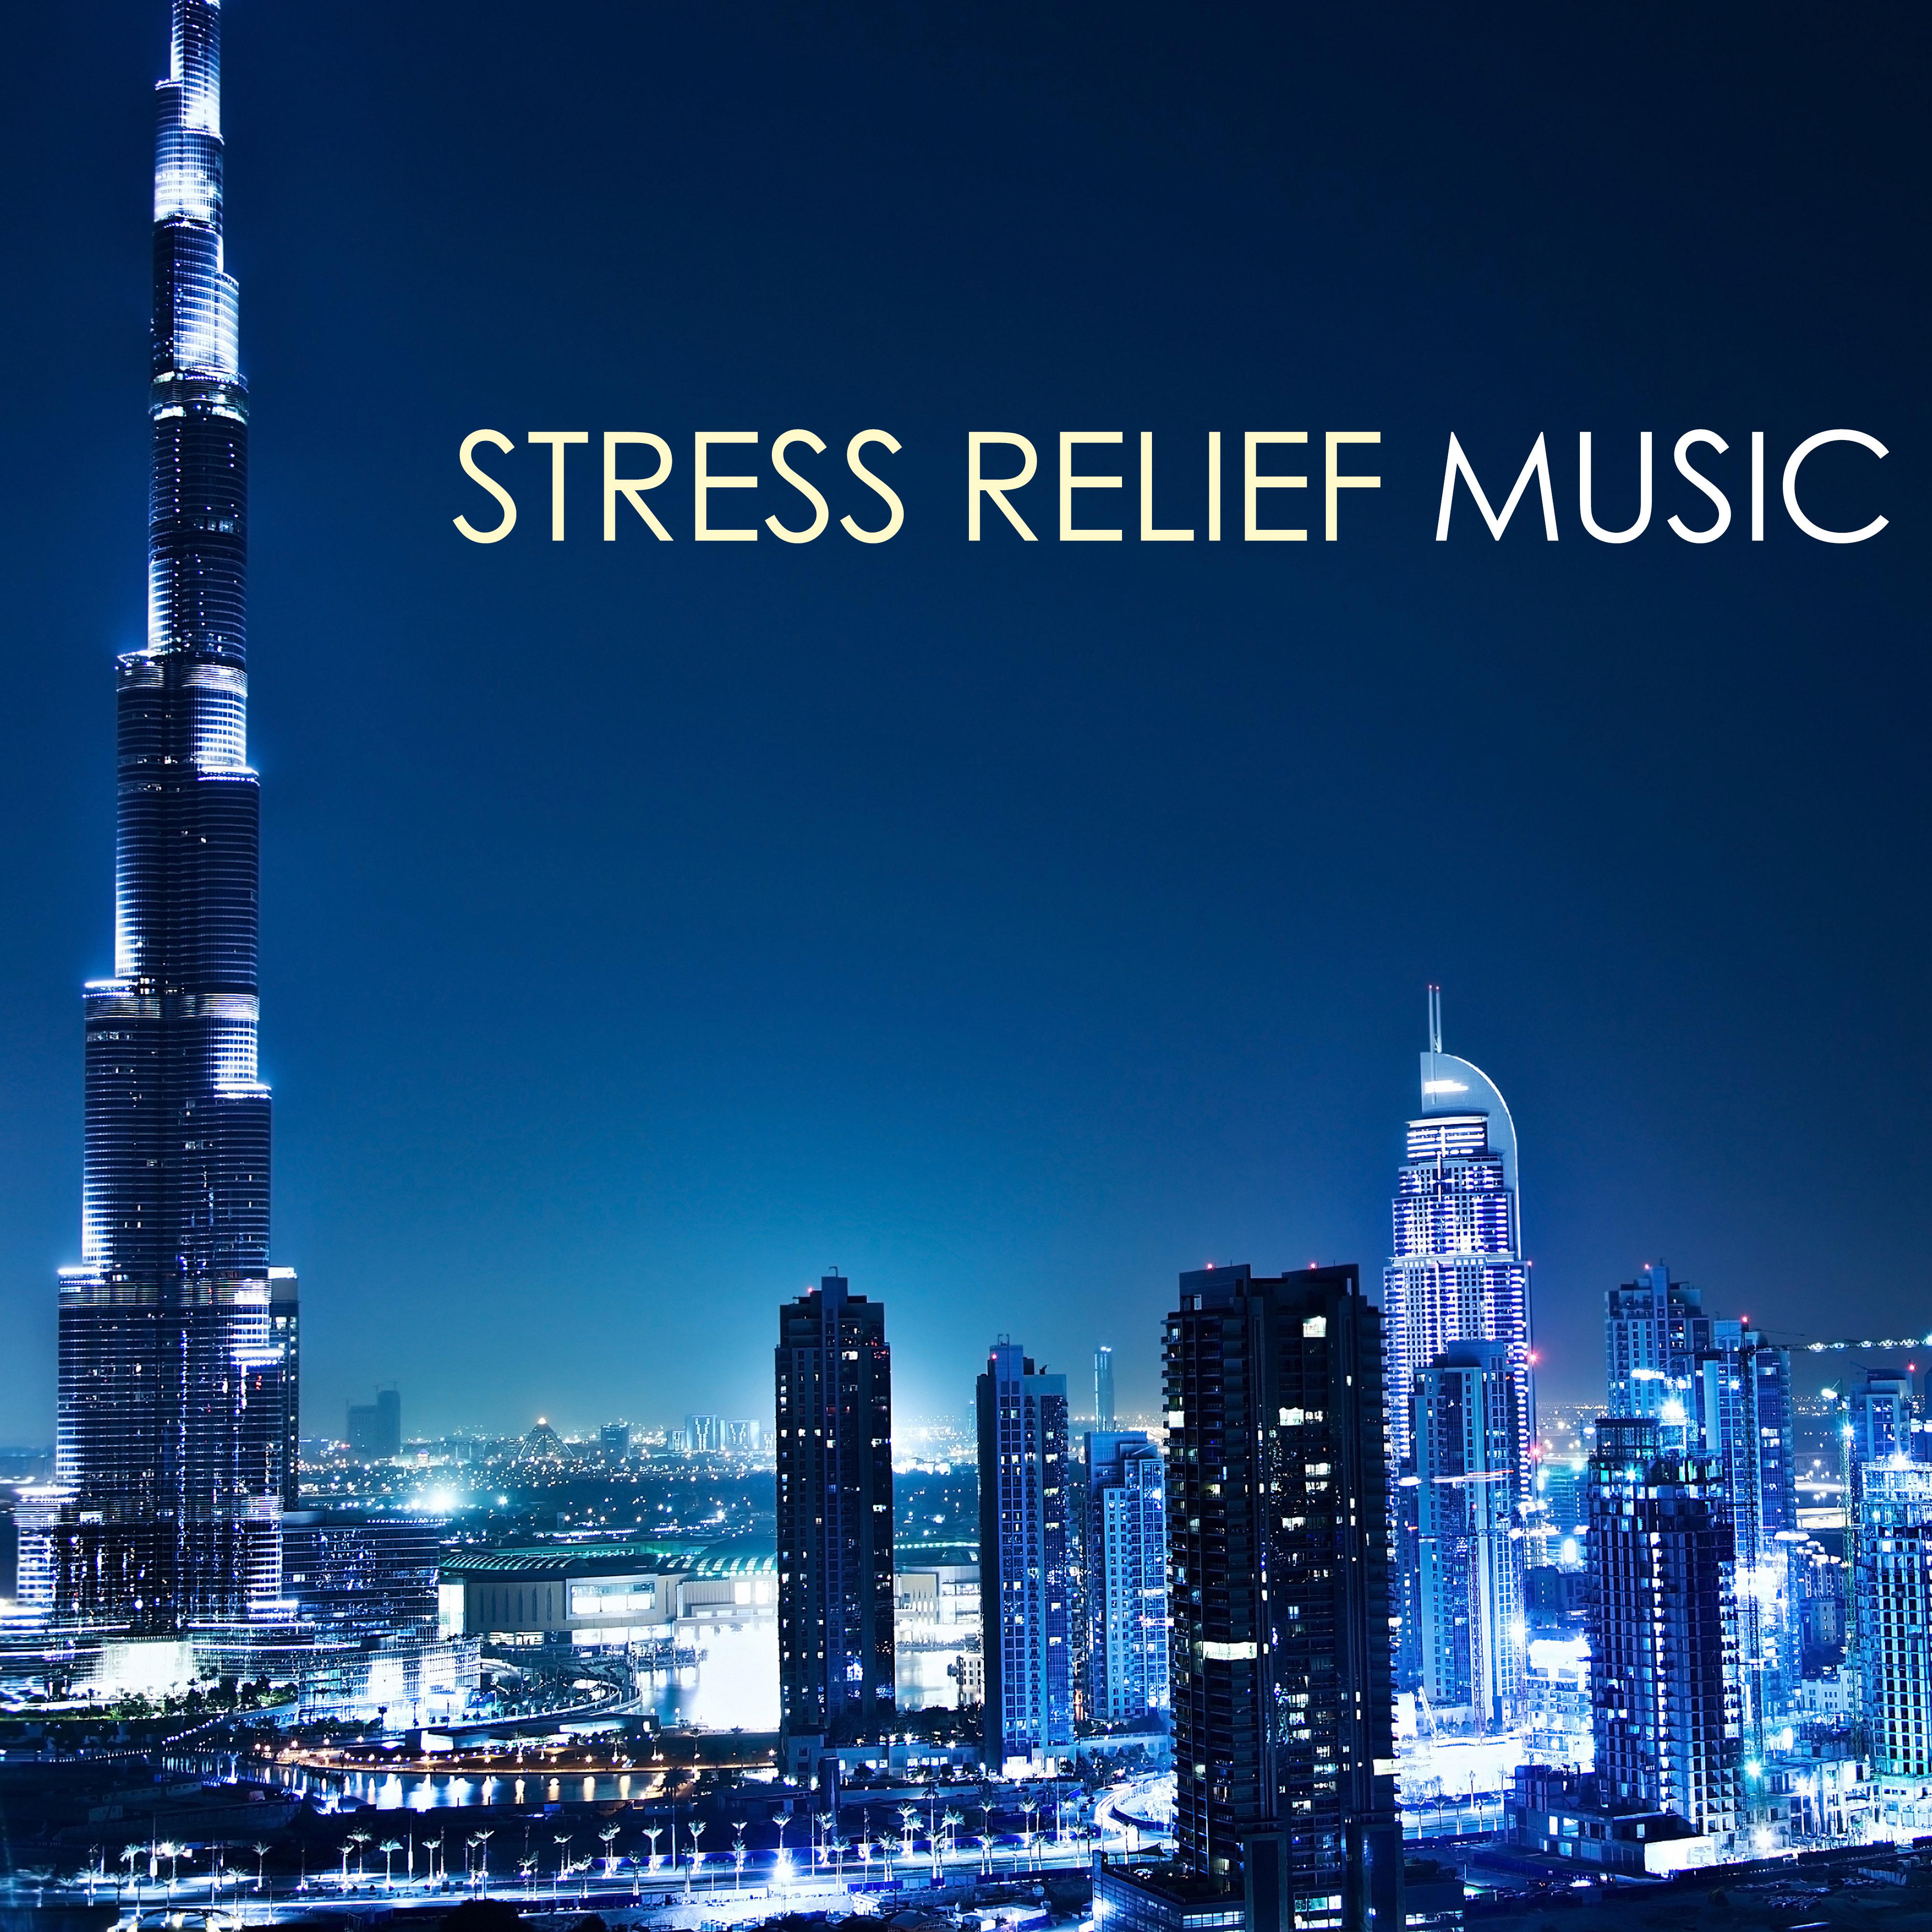 Stress Relief Music - Relax & Recharge at the Office with Relaxing Sounds of Nature Ambience Songs